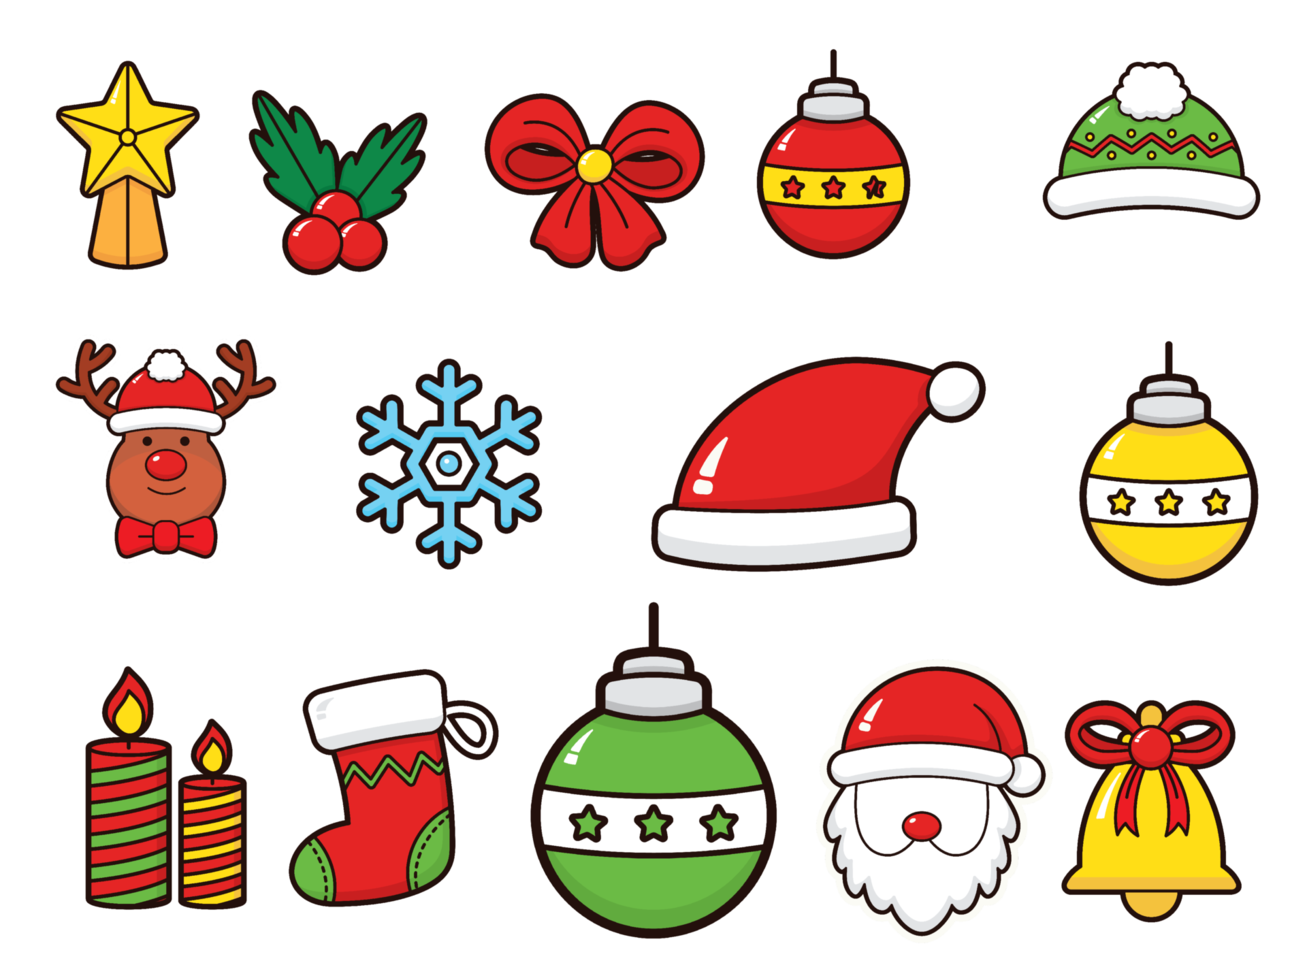 Merry Christmas Cute Stickers for holiday 14525053 PNG